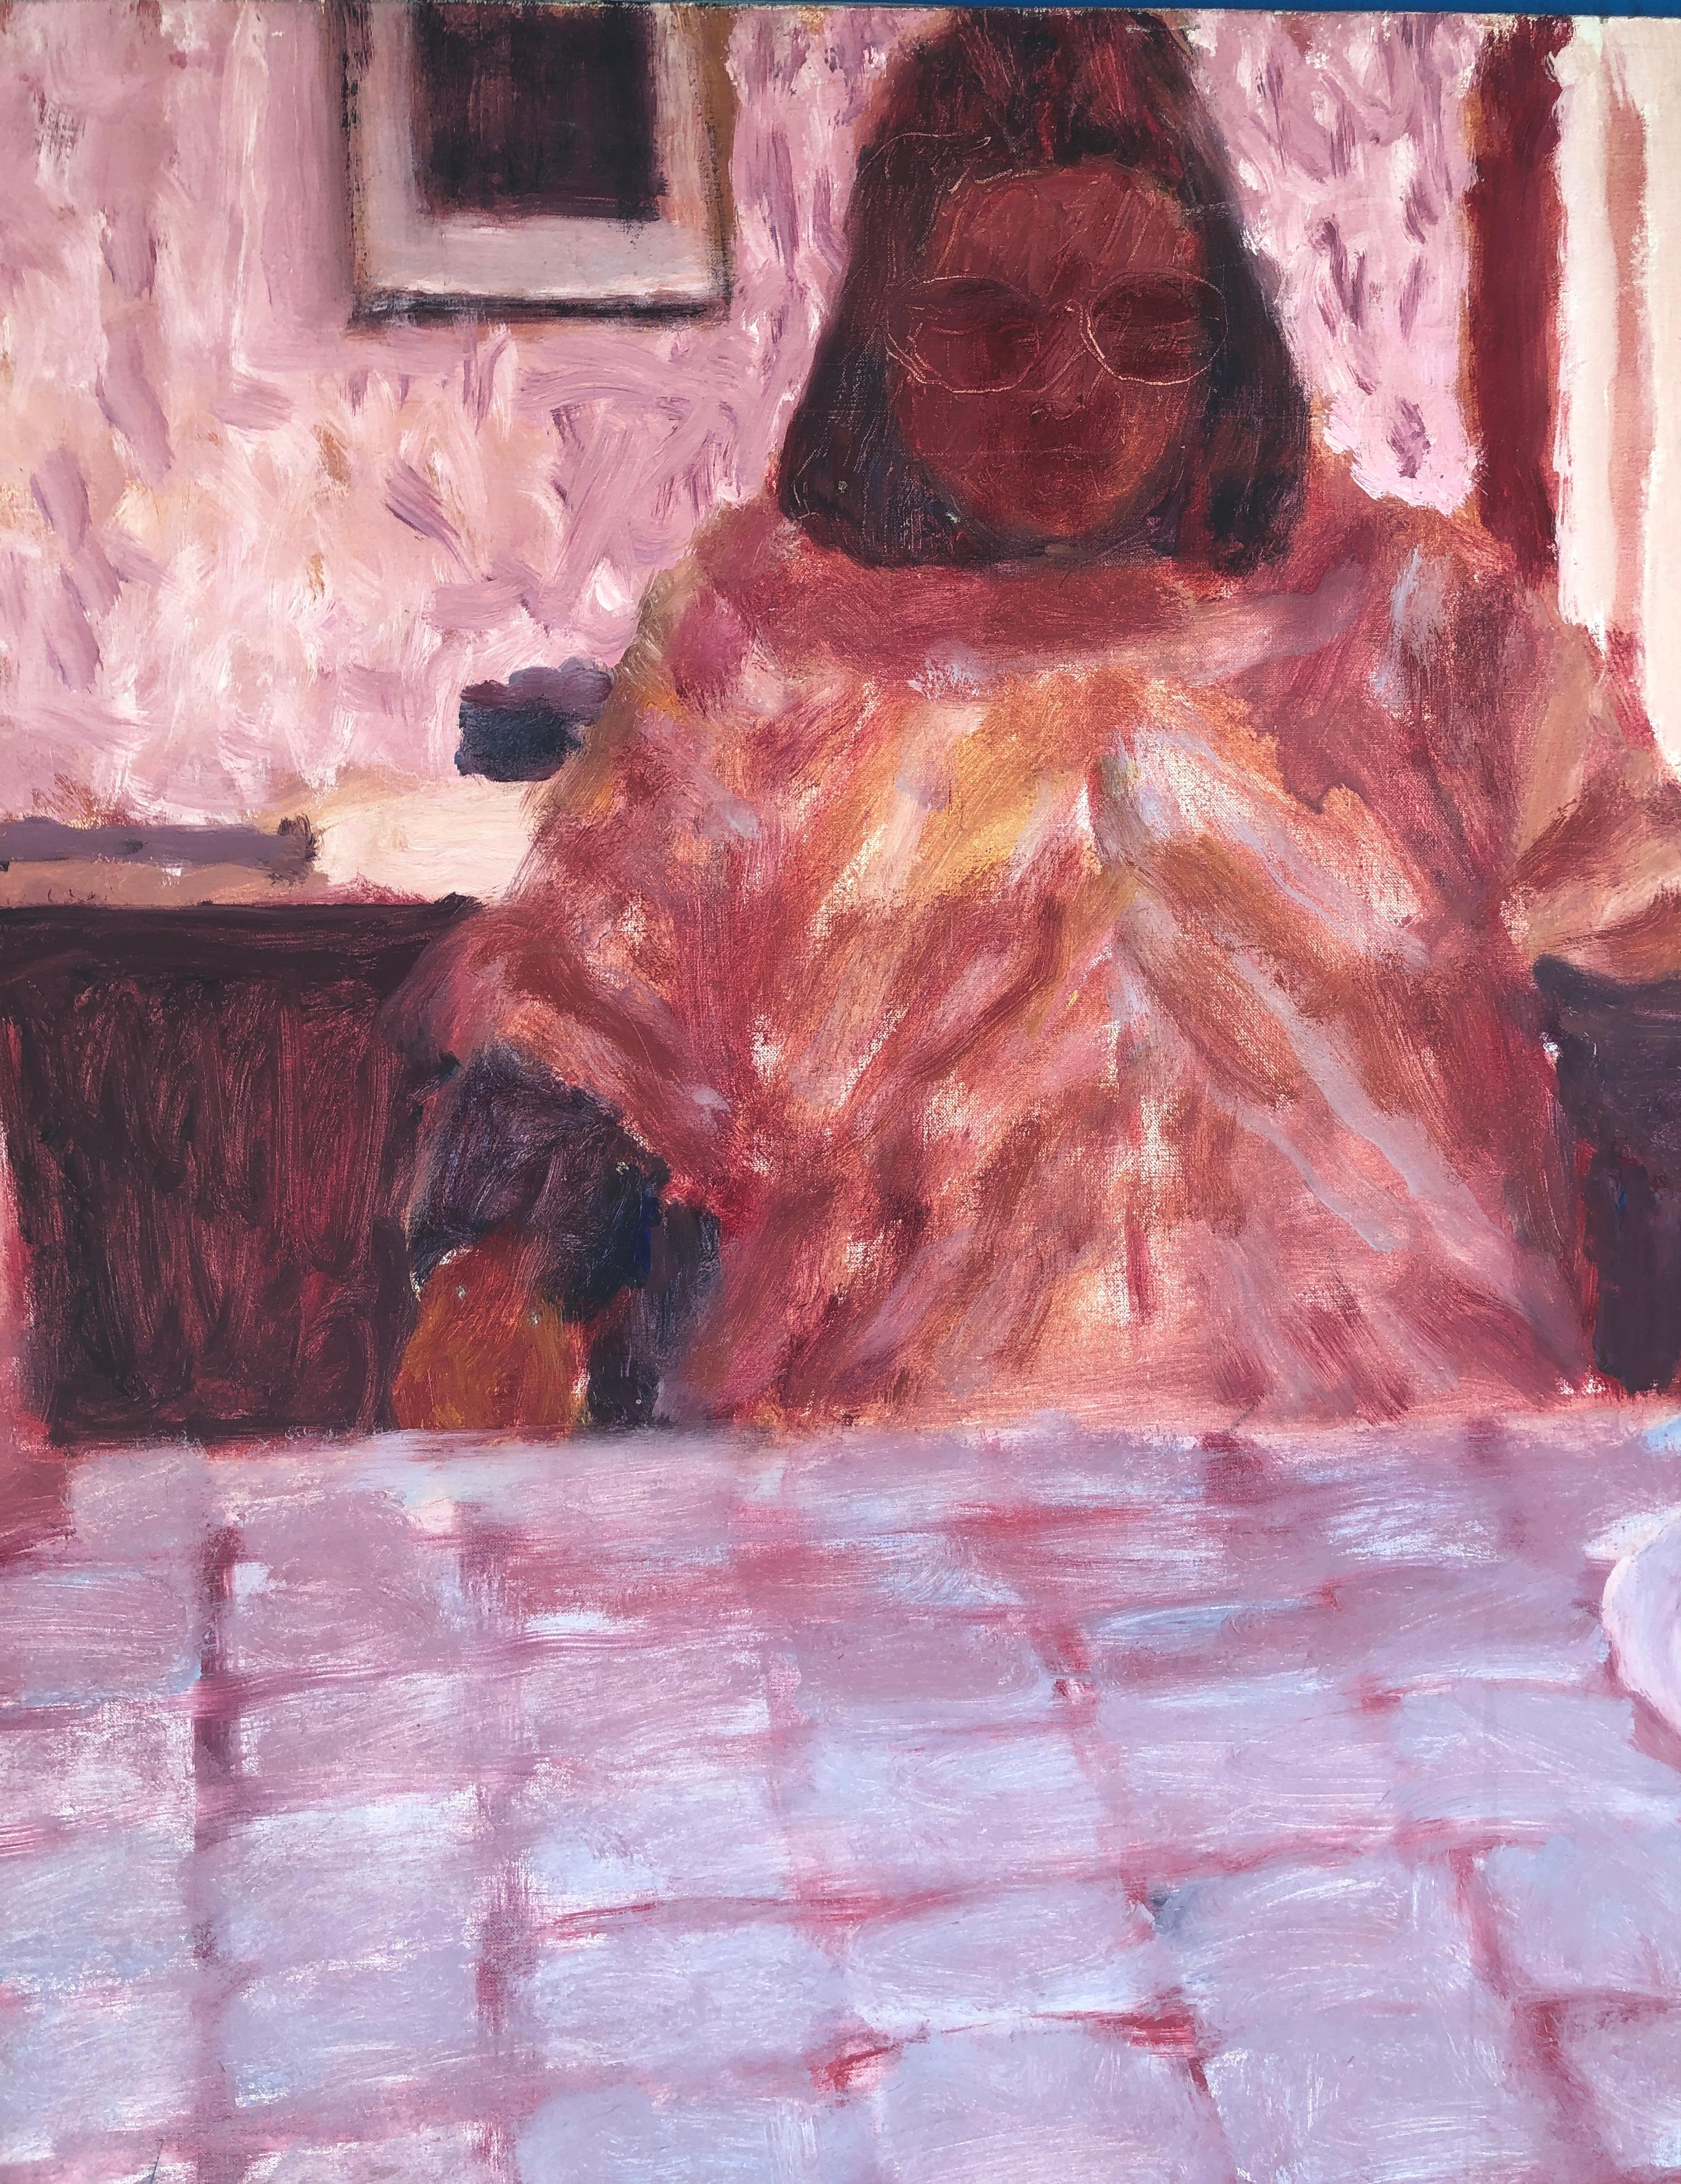 Waiting for the food fauvist oil on canvas painting - Brown Portrait Painting by Roberto Ortuño Pascual